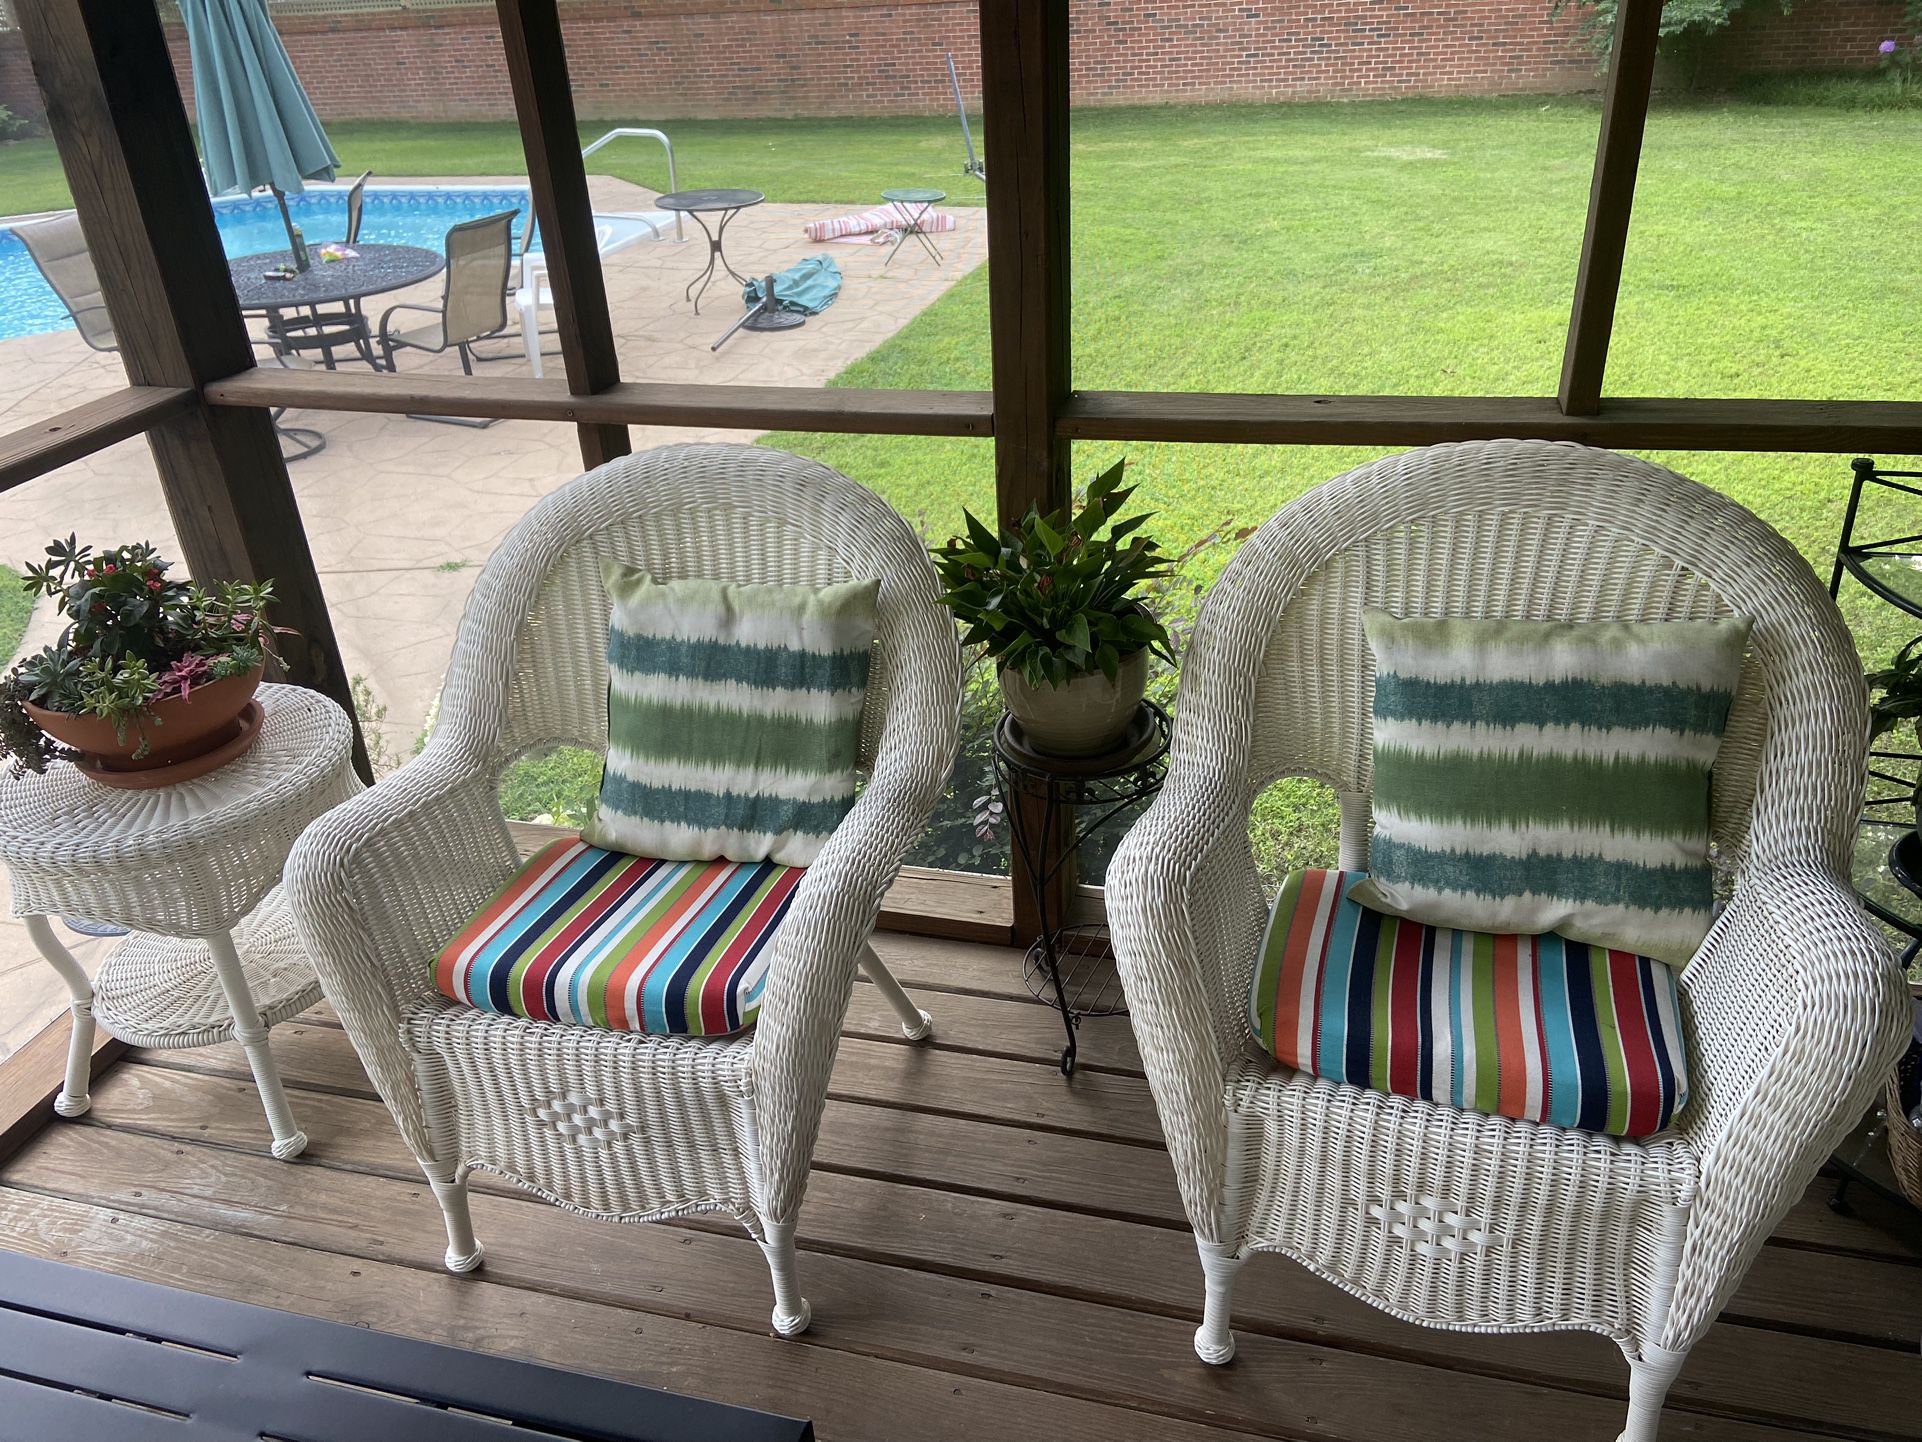 Wicker Patio Furniture (5 pieces Included)